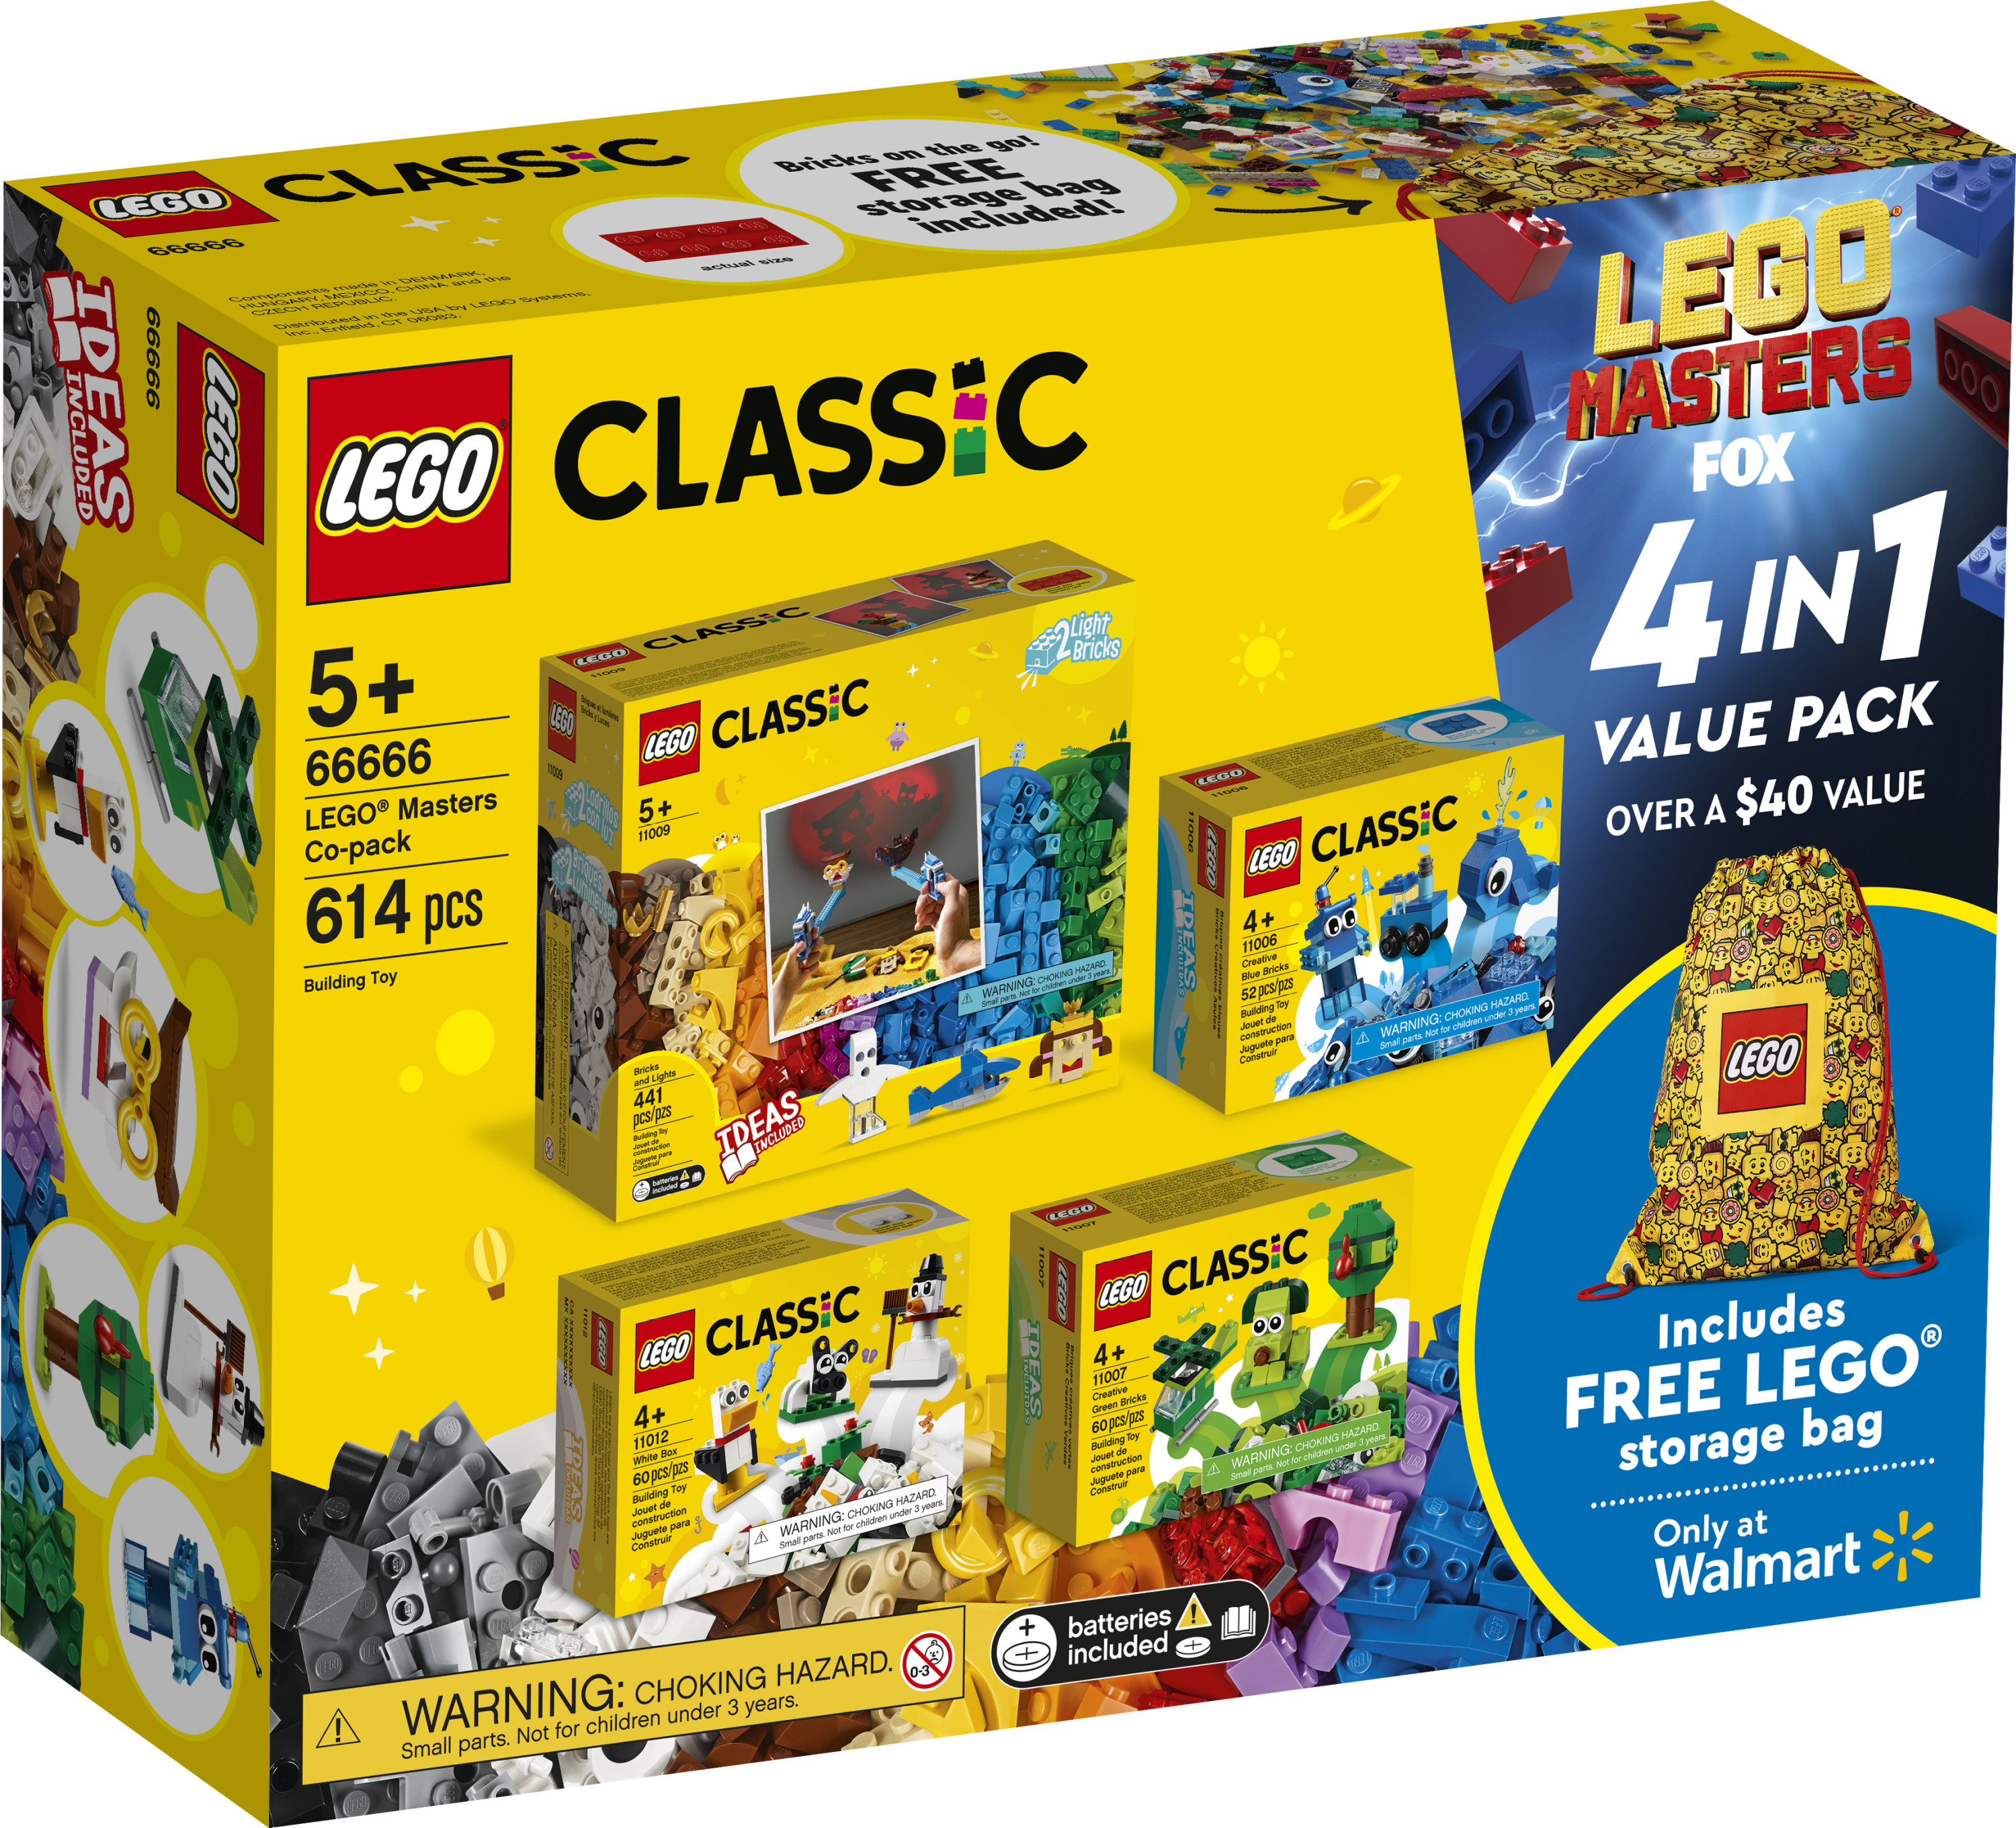 LEGO Masters Co-pack 66666 Creative Building Toy Value Set (613 Pieces) - image 1 of 3